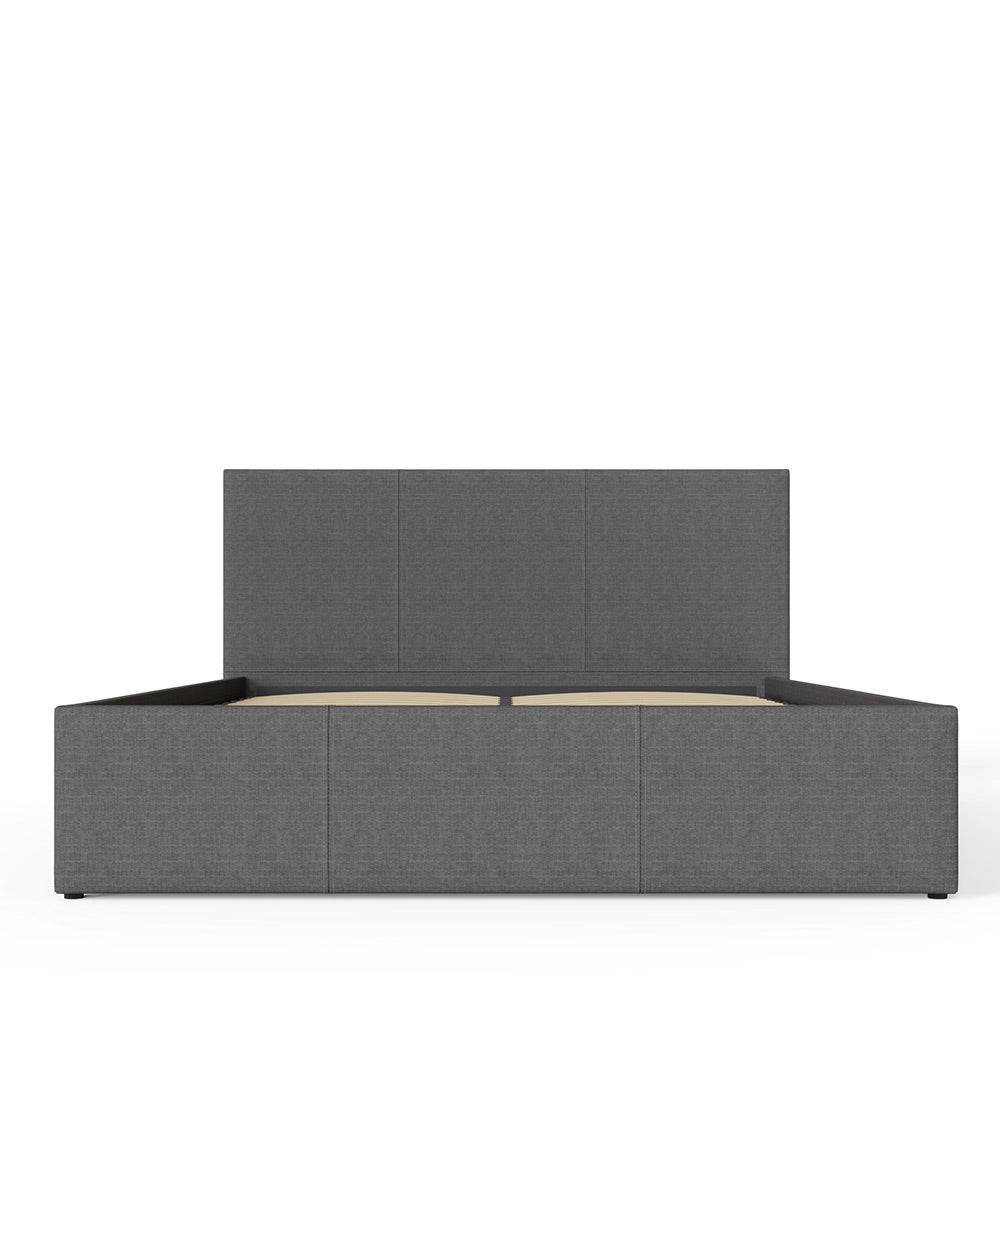 end lift ottoman bed on a white cut out background